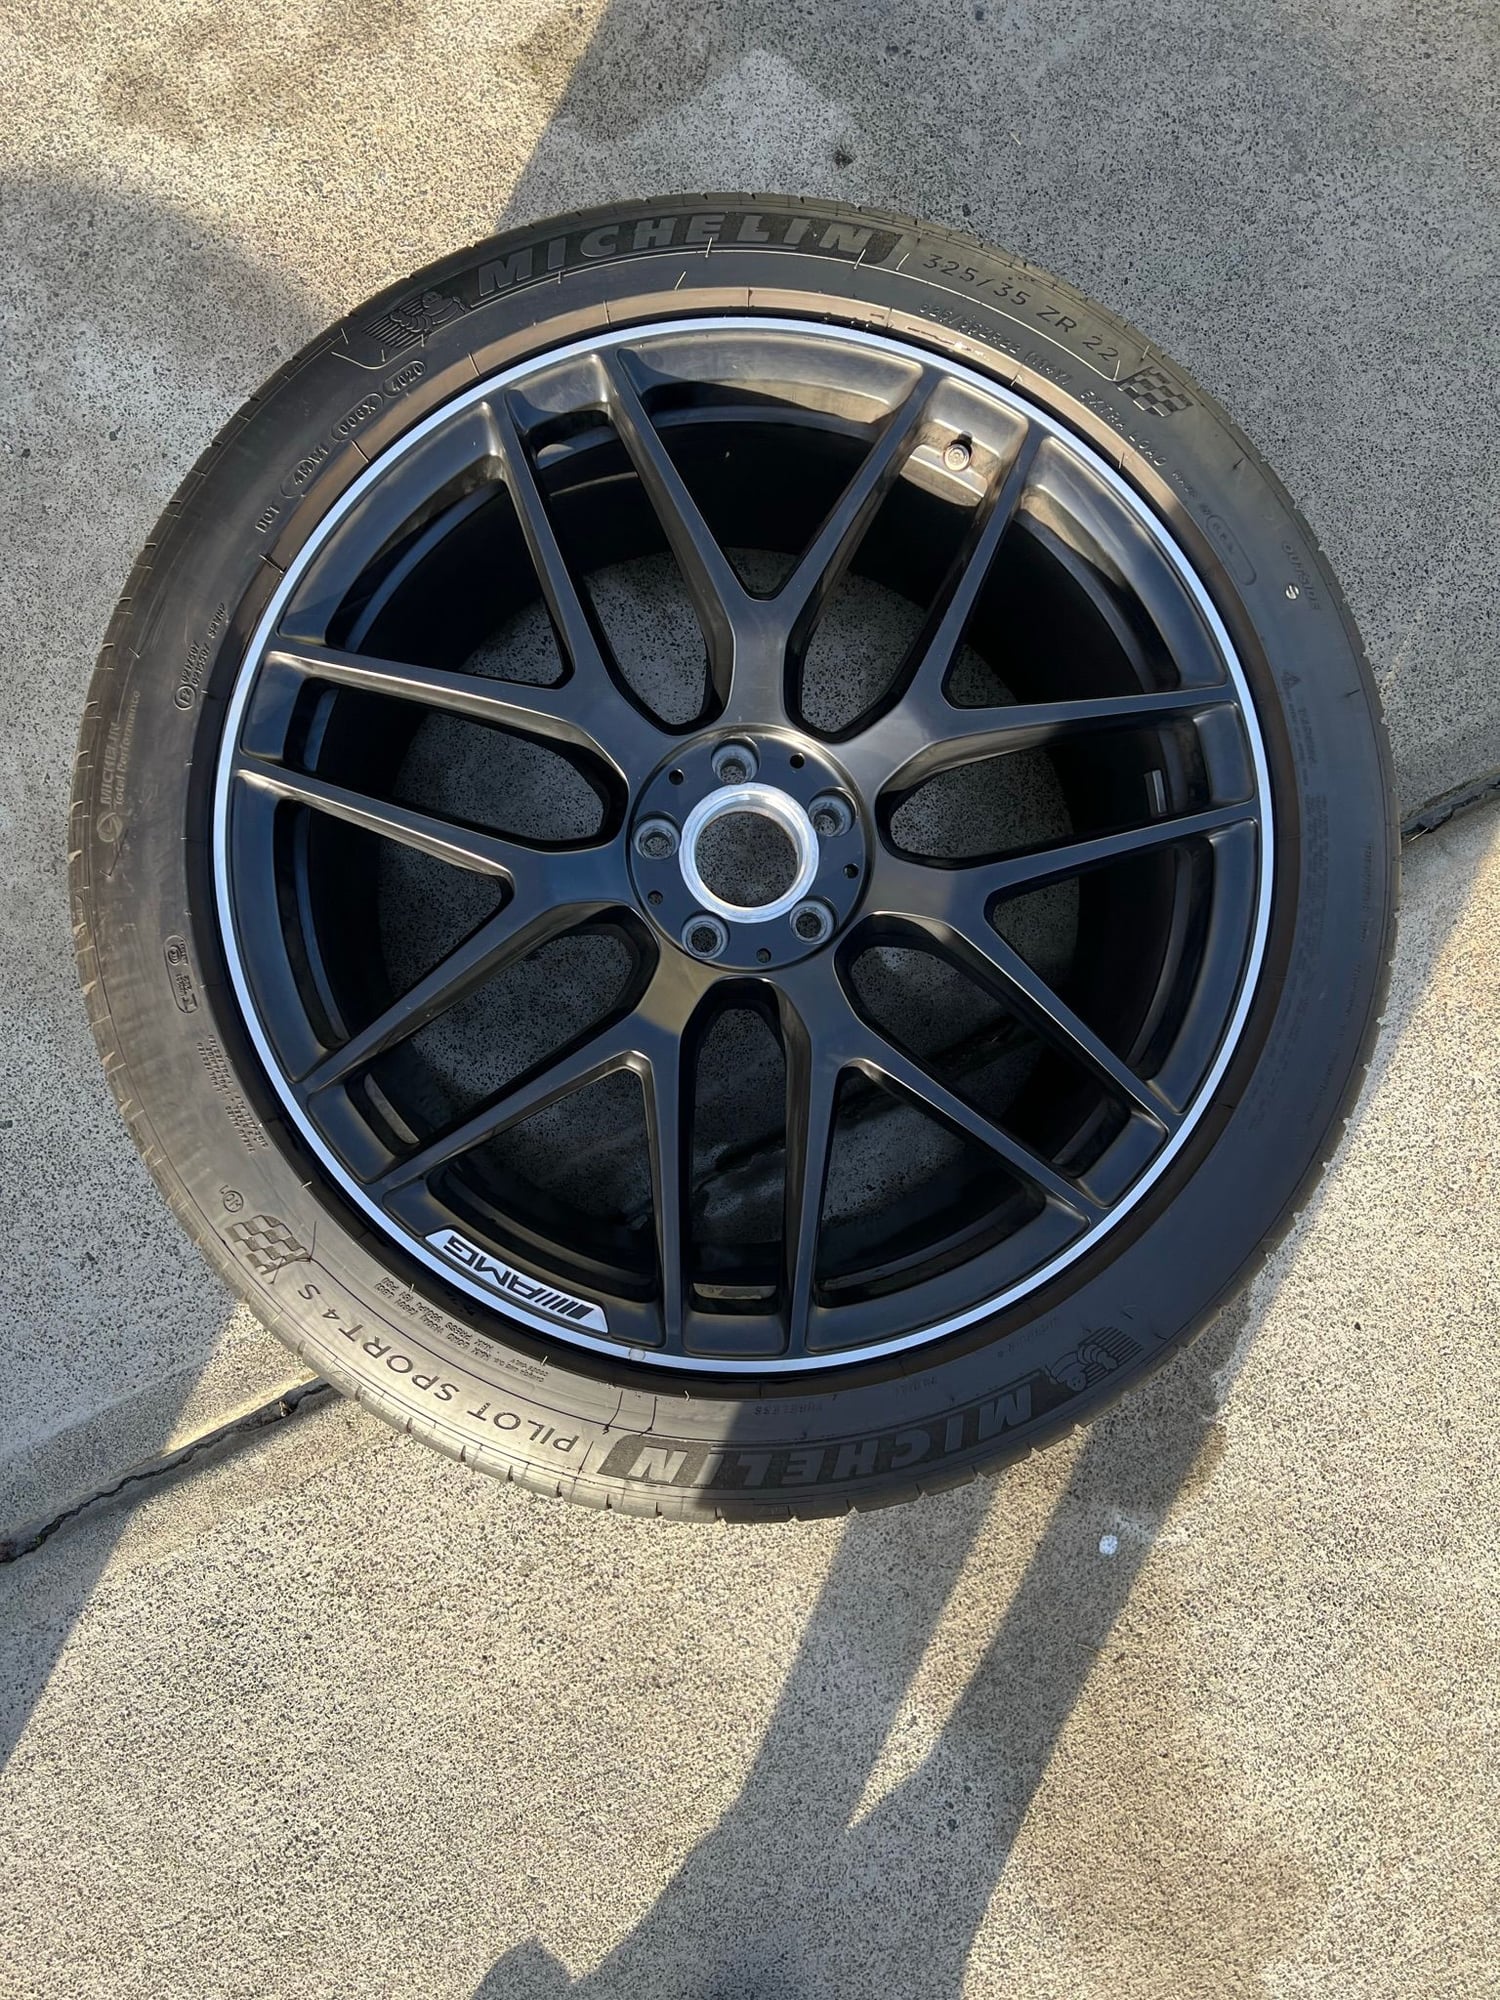 Wheels and Tires/Axles - SET OF 4 22" OEM AMG CROSS SPOKE FORGED WHEELS MERCEDES BENZ GLE 53 GLE 63 AMG - New - 2019 to 2022 Mercedes-Benz GLE-Class - 2019 to 2022 Mercedes-Benz GLE63 AMG - 2019 to 2022 Mercedes-Benz GLE63 AMG S - Durham, NC 27713, United States